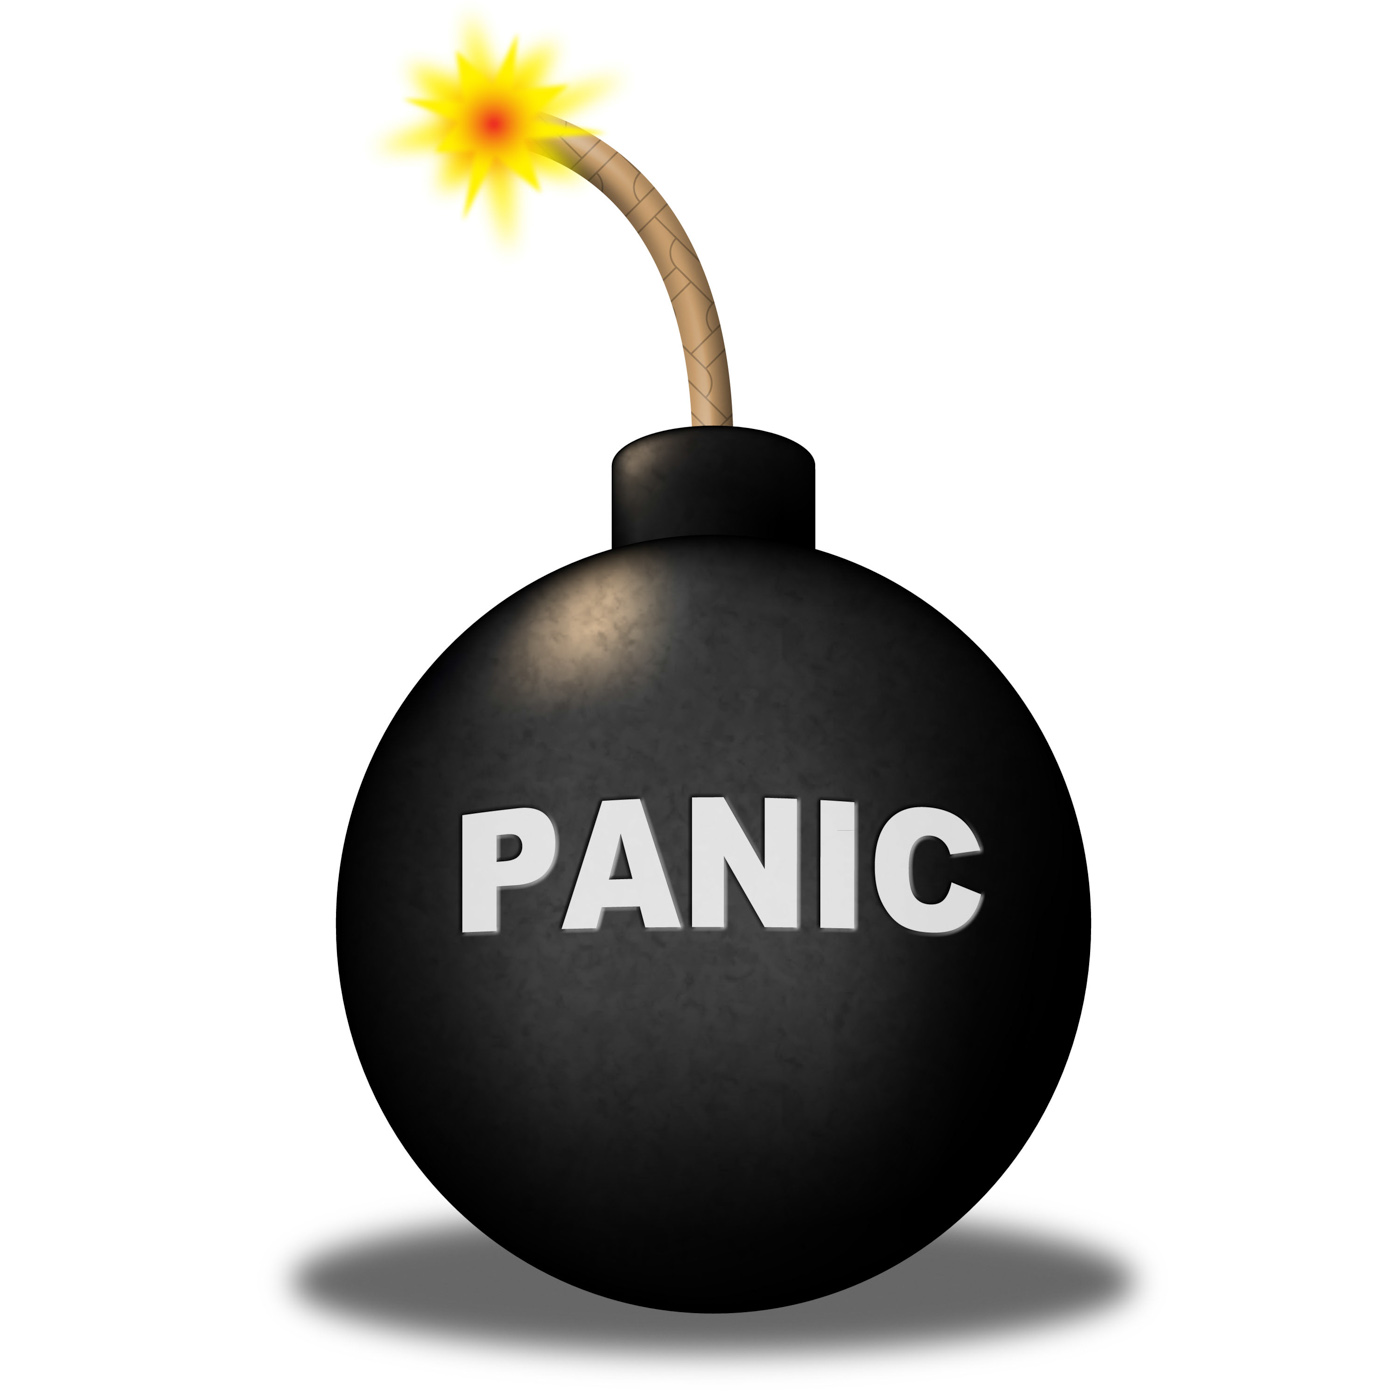 Panic warning represents hysteria anxiety and terror photo